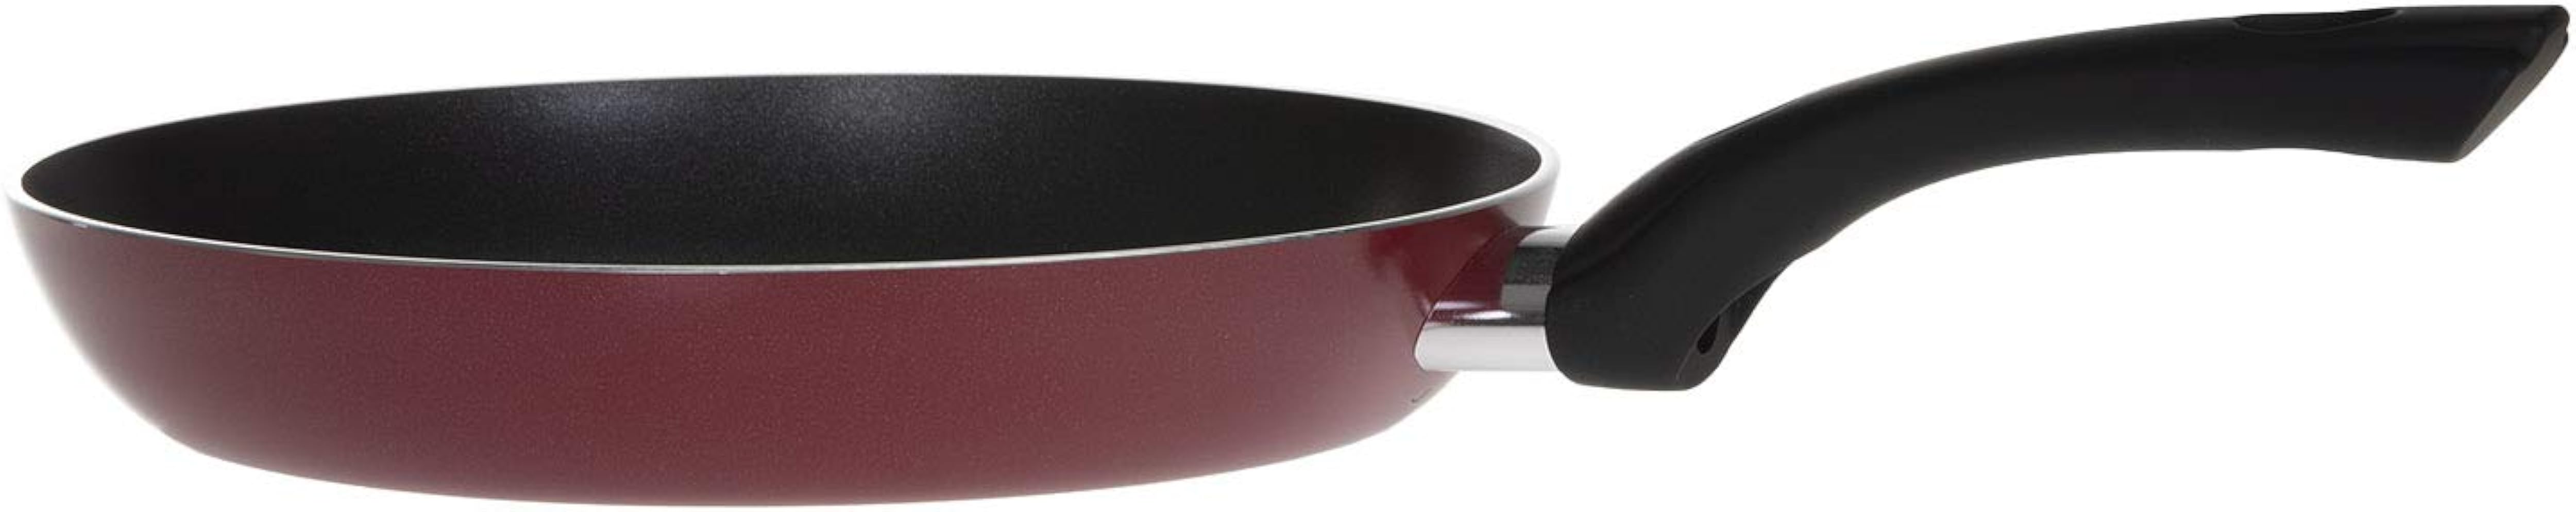 Royalford Frying Pan, 26 cm- Aluminum Non-Stick Fry Pan – Ergonomic Handle - Saute Pan/Deep Frying Pan with Glass Lid – Suitable for Multiple Hob Types - Ideal for Frying Sautéing Stir Frying